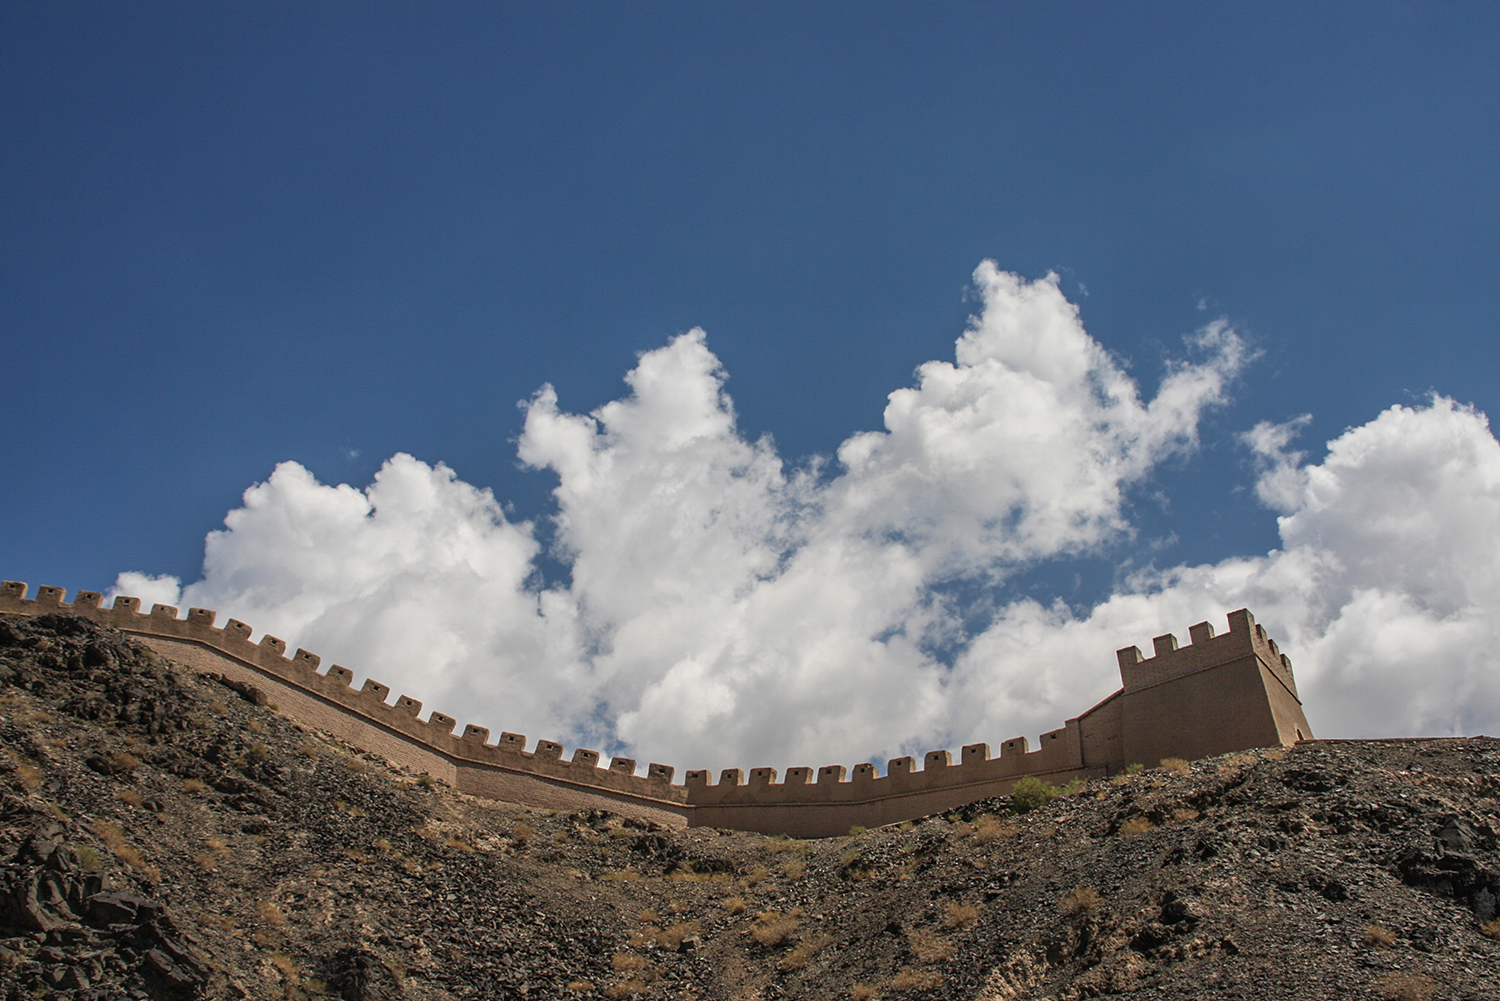 china_gansu_jiayuguan and overhanging great wall_architecture on the road